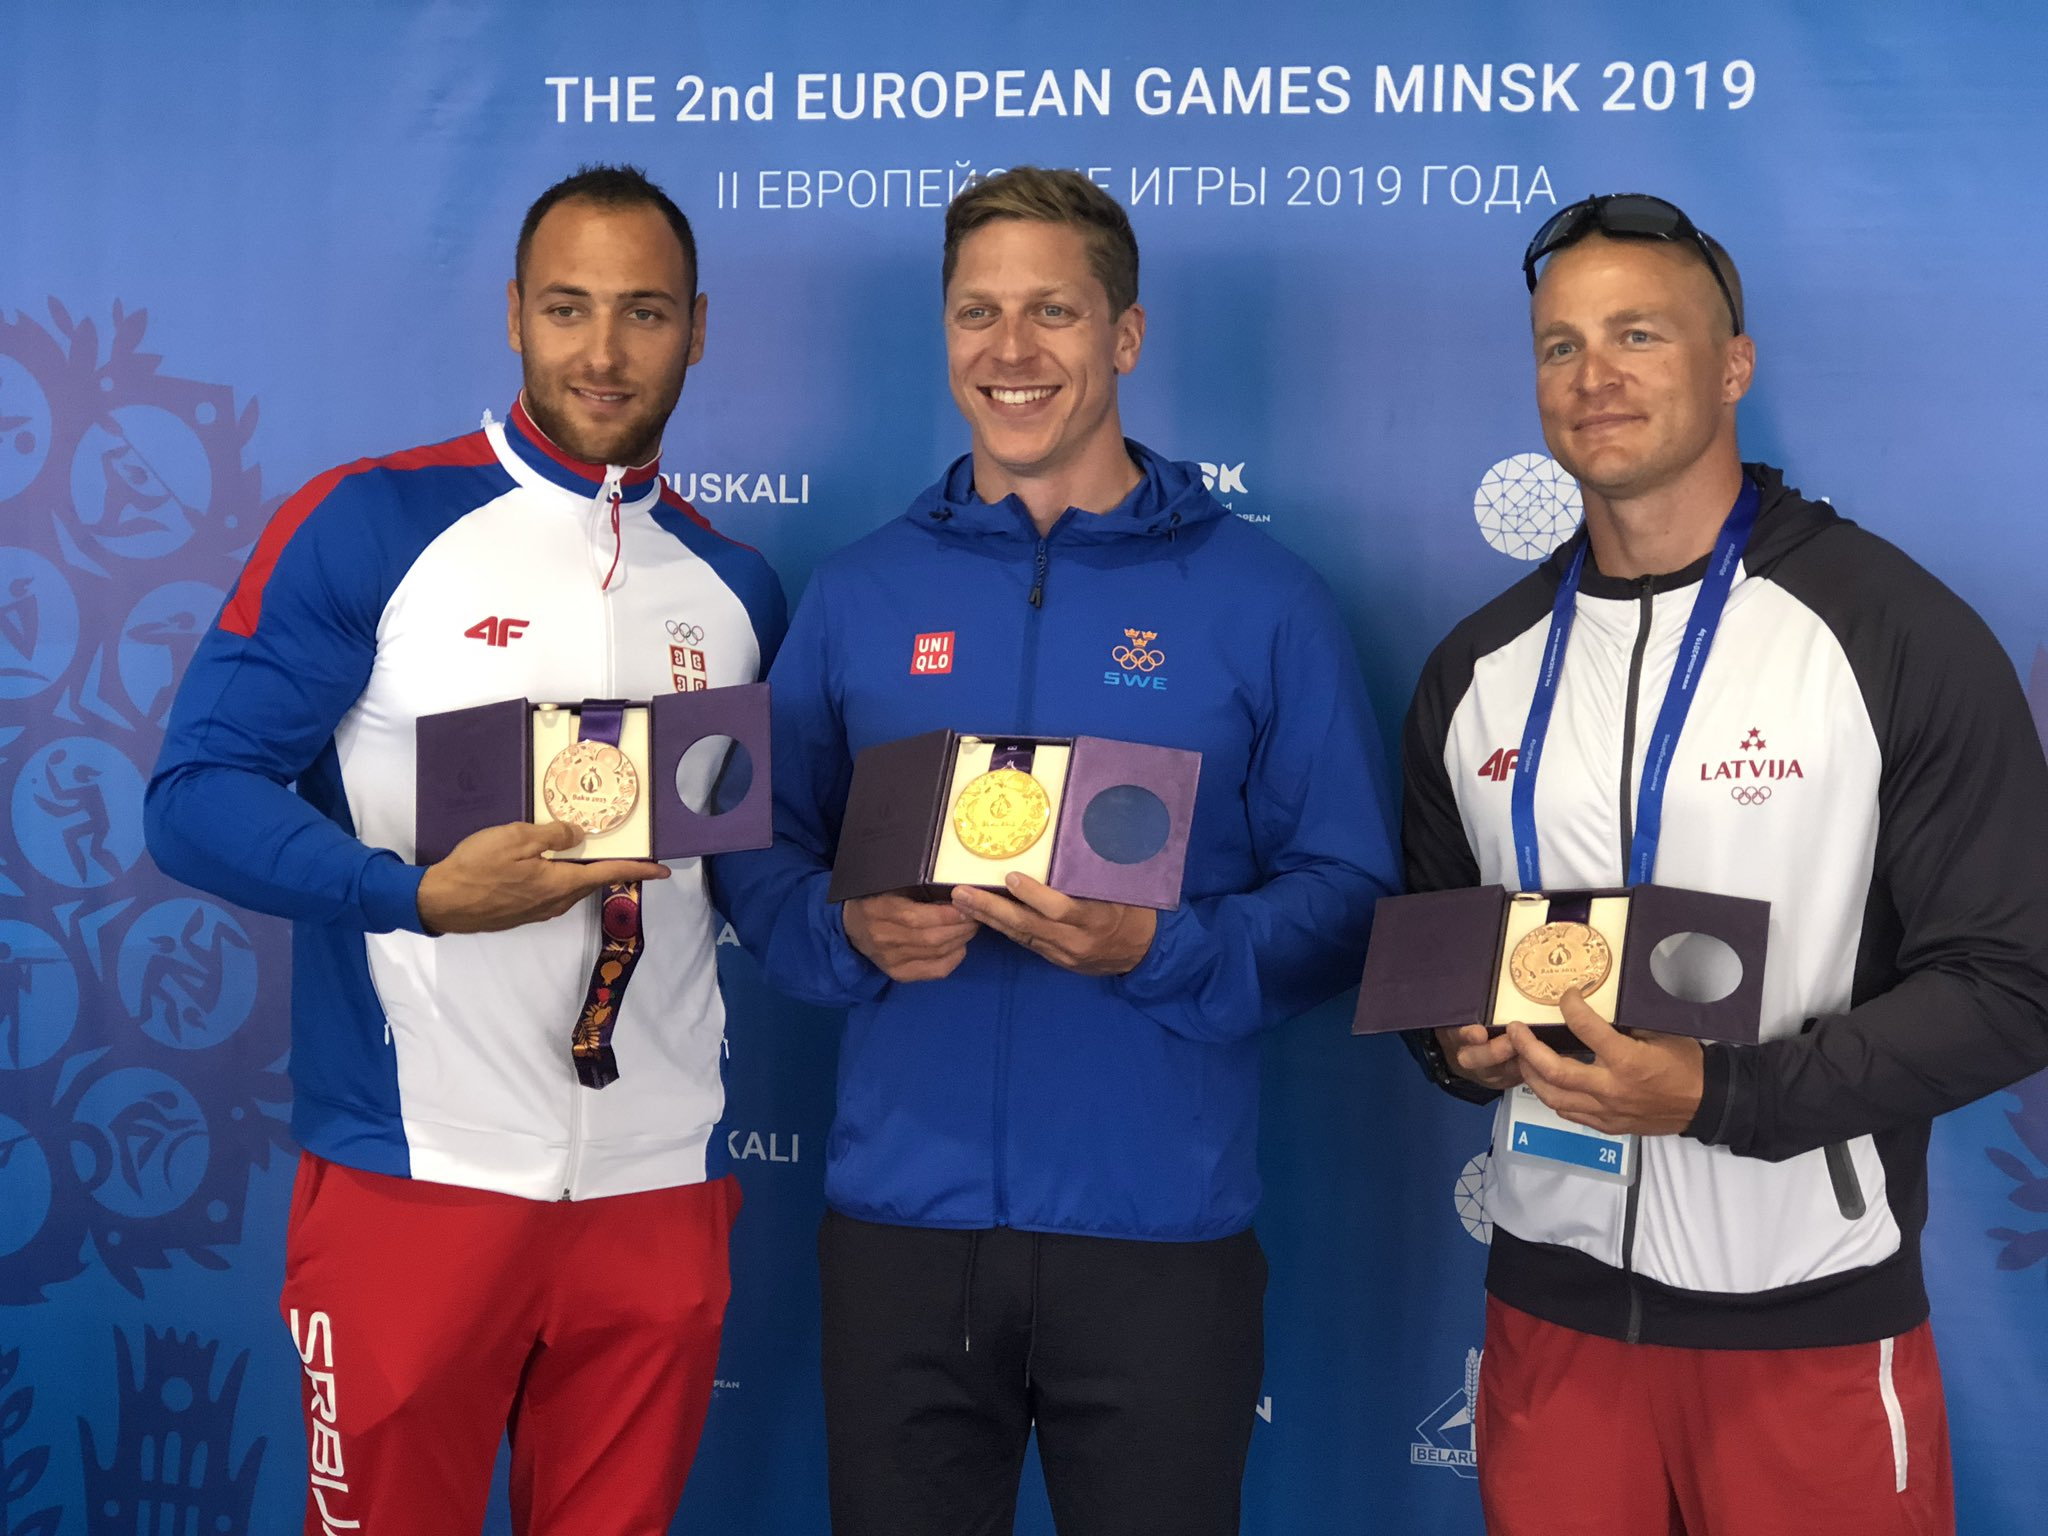 A canoe sprint reallocation ceremony took place at Minsk 2019 after Hungary's Miklós Dudás was stripped of Baku 2015 gold ©EOC